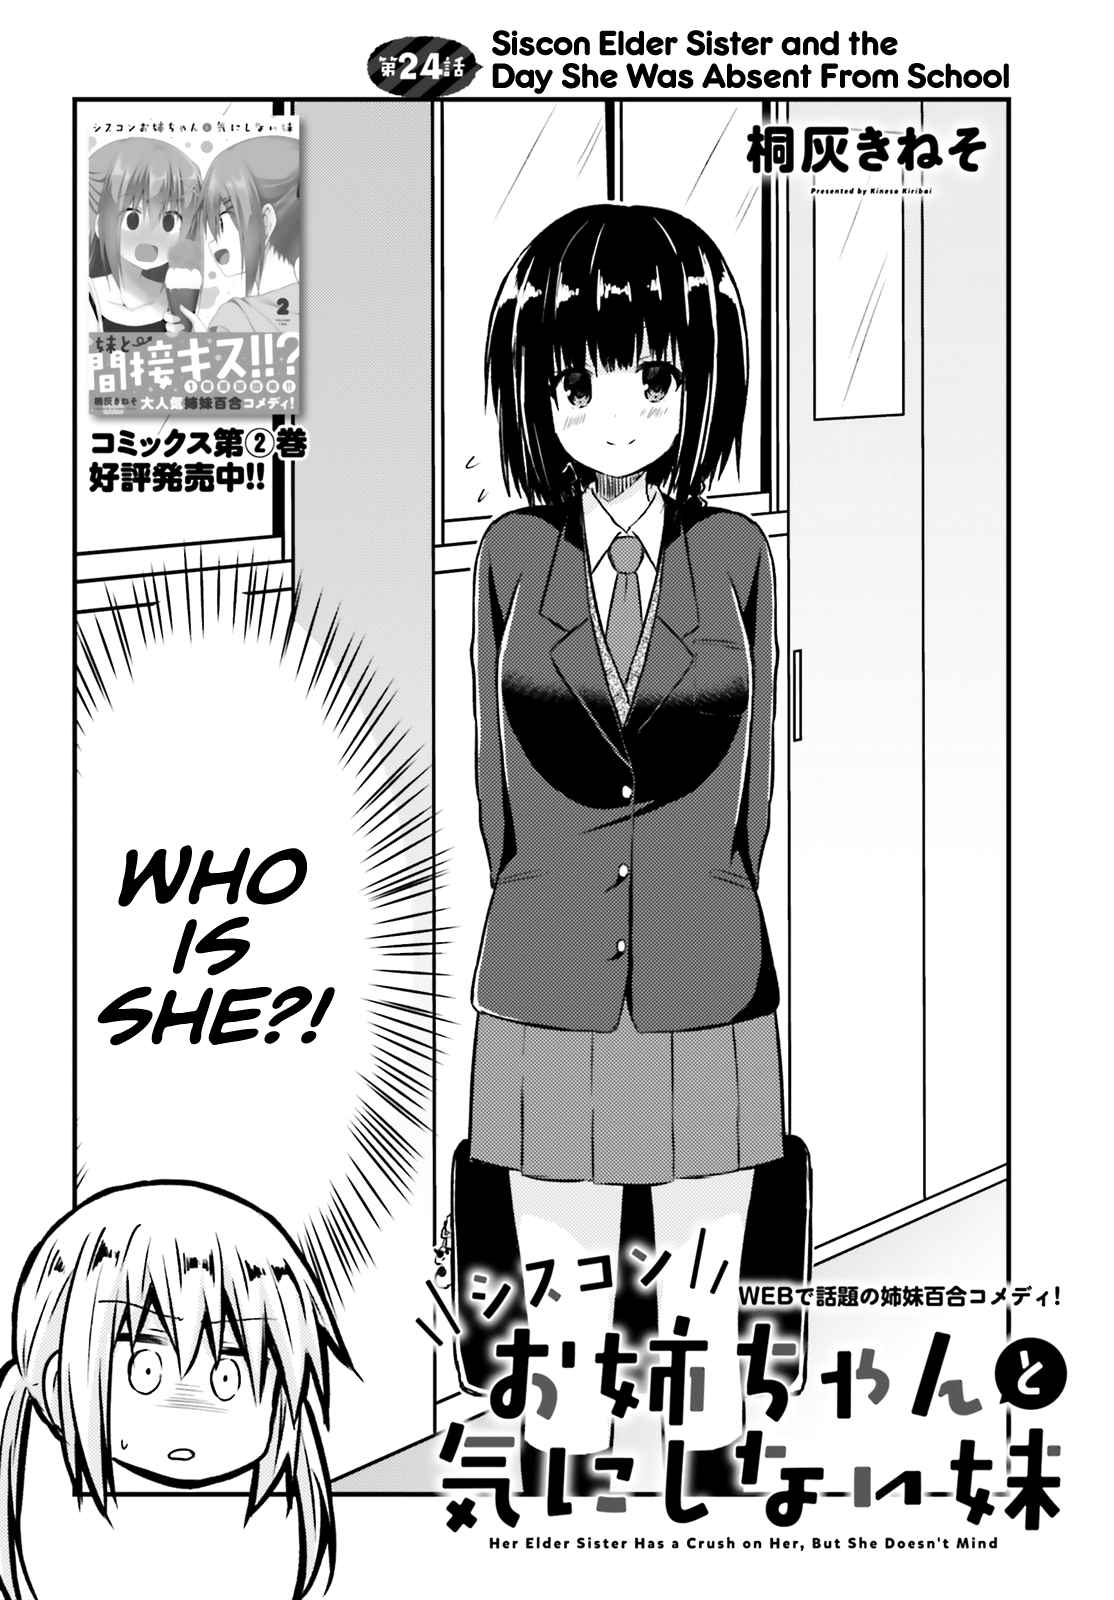 Her Elder Sister Has a Crush on Her, But She Doesn't Mind. Ch. 24 Siscon Elder Sister and the Day She Was Absent From School